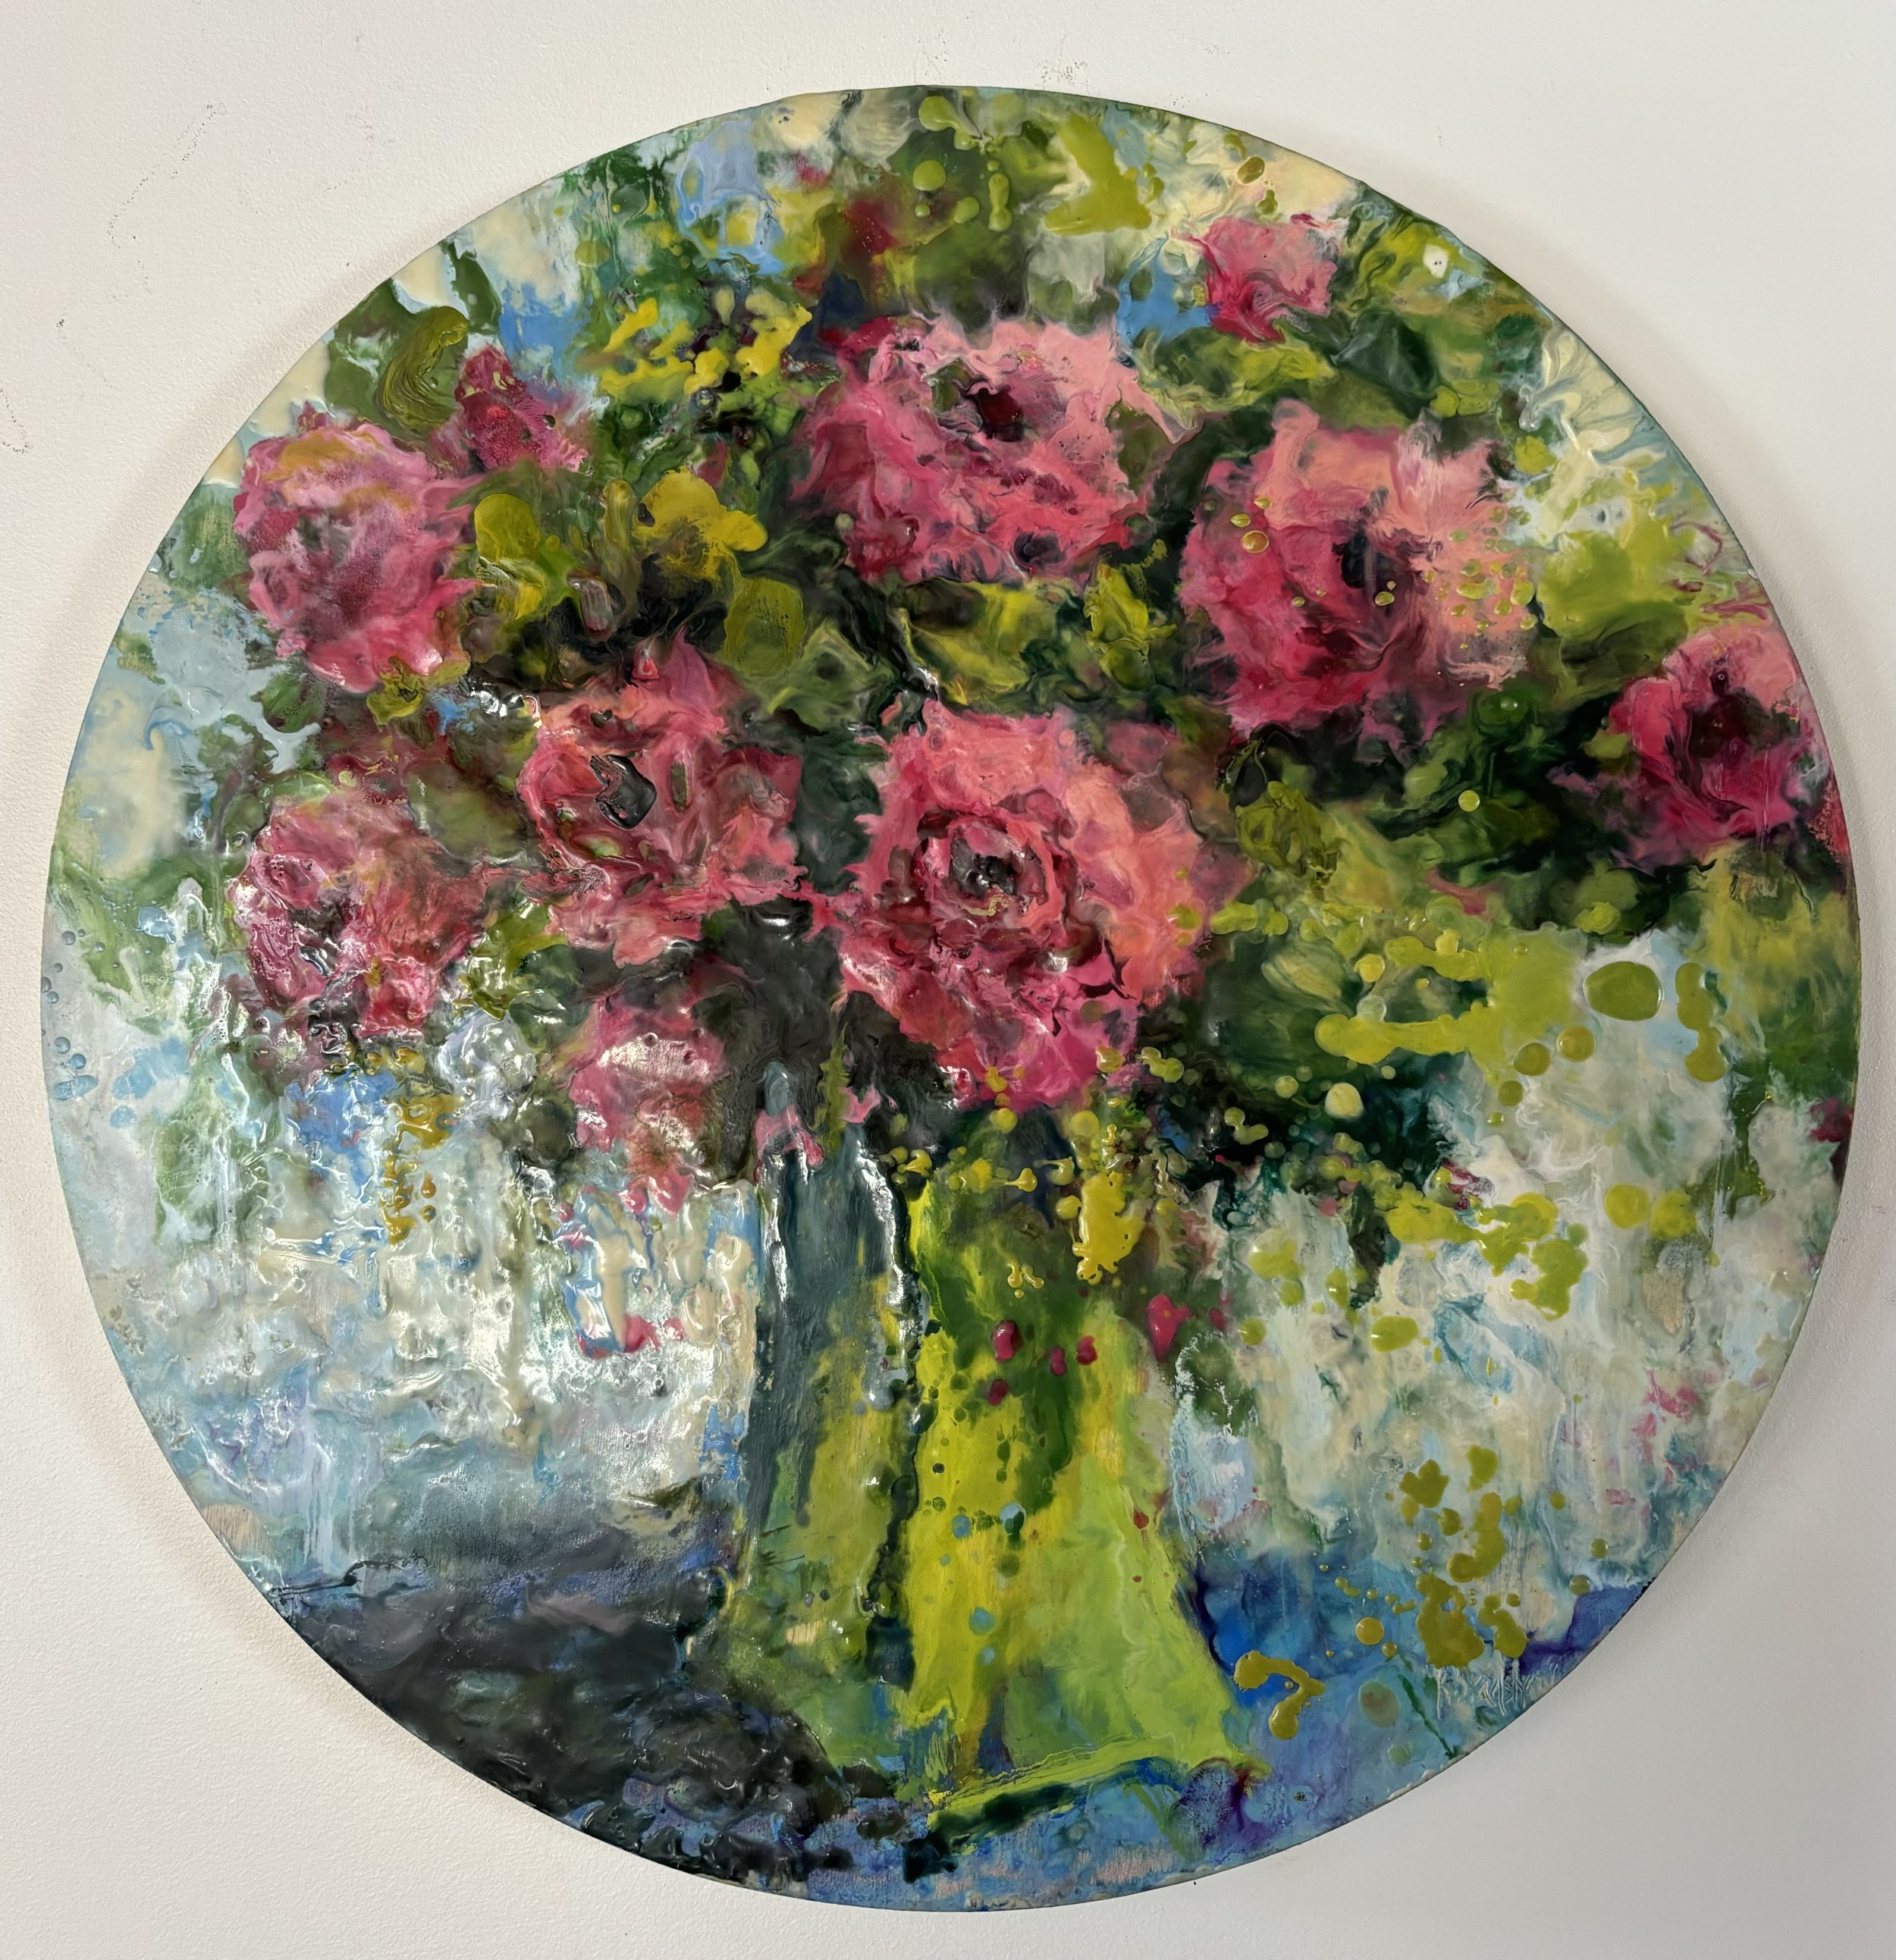 Roses in the Round